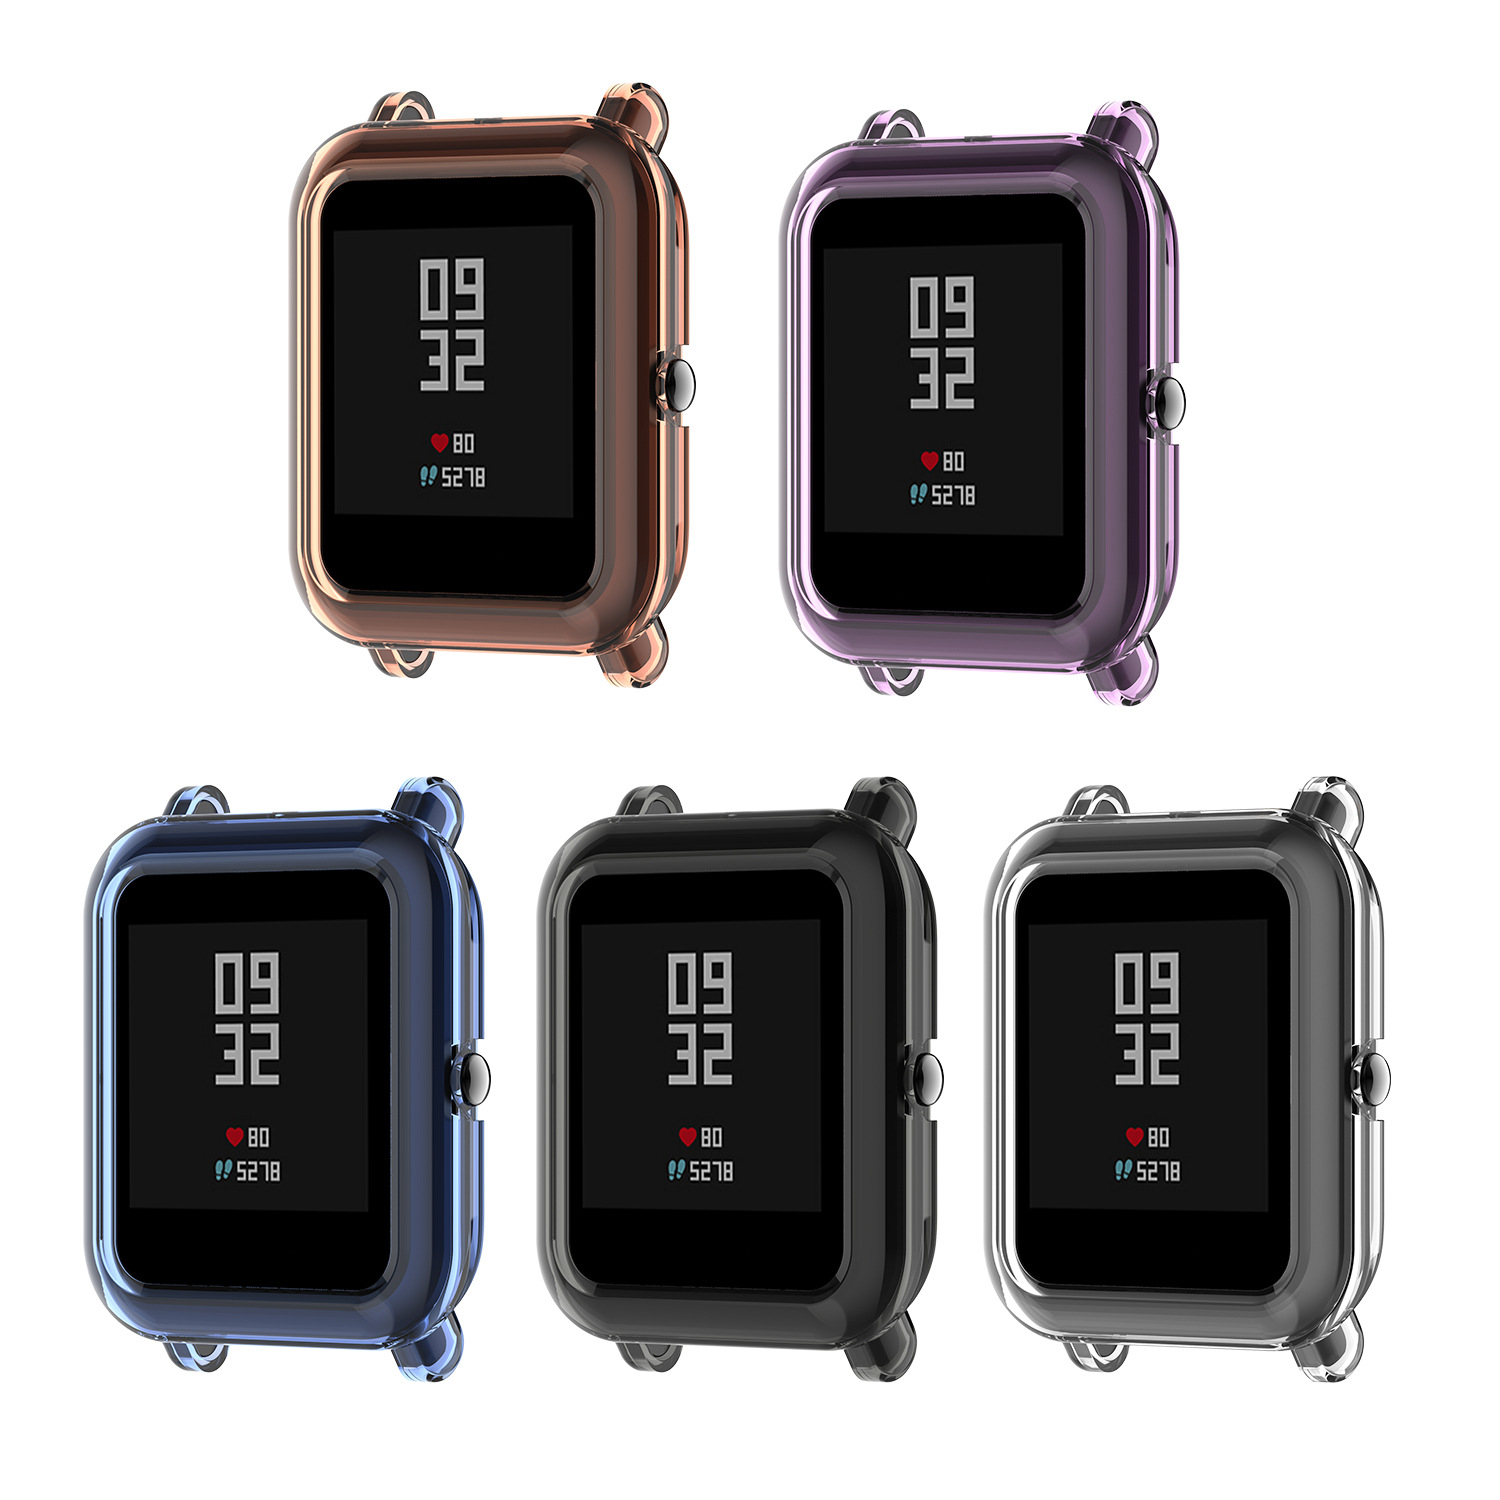 TPU-Watch-Case-Watch-Cover-Case-Cover-for-Amazfit-Bip-1S-1700224-2